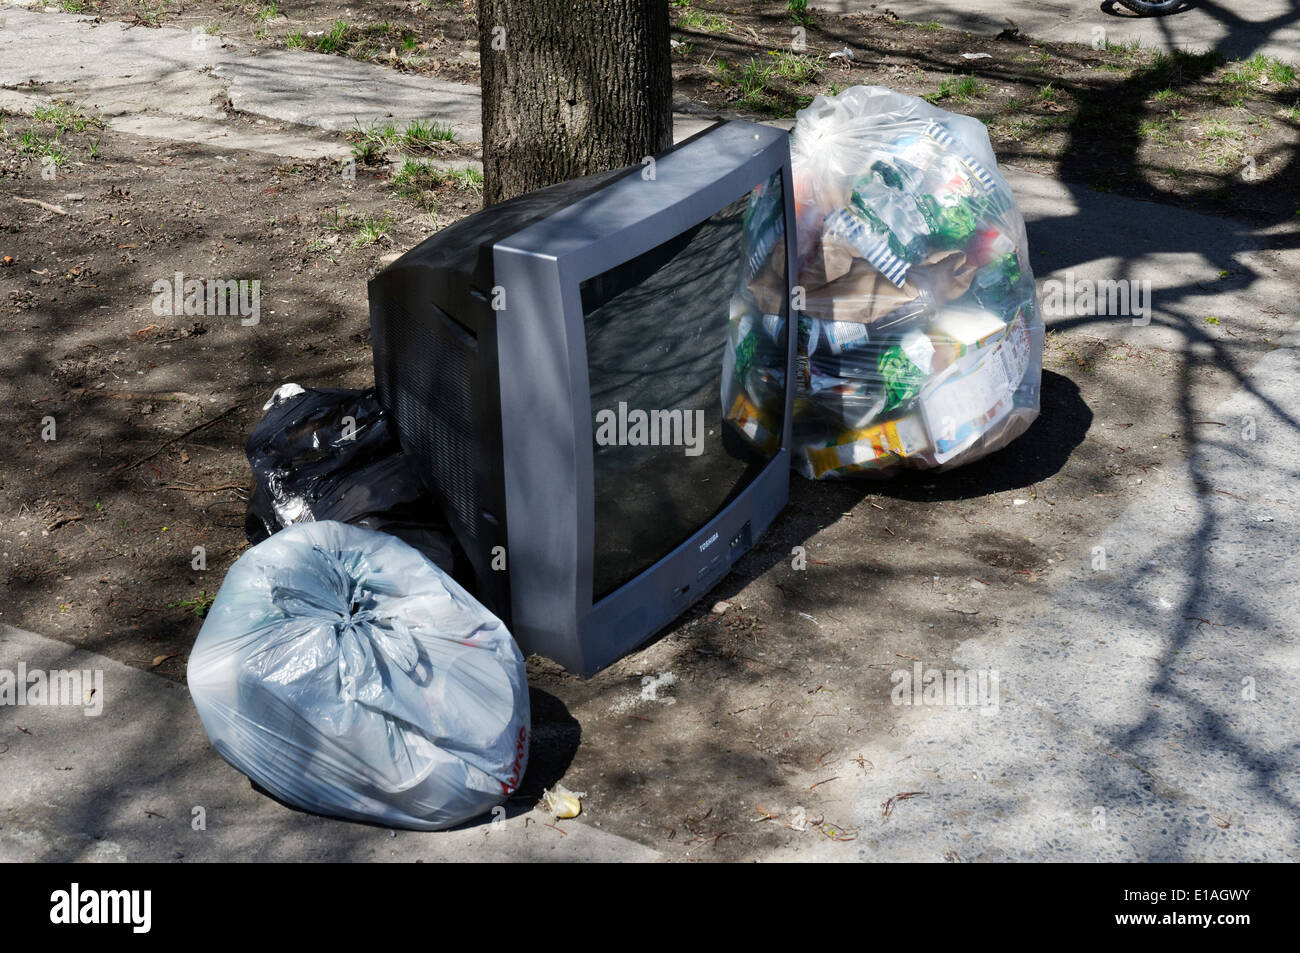 A TV thrown out with the garbage Stock Photo